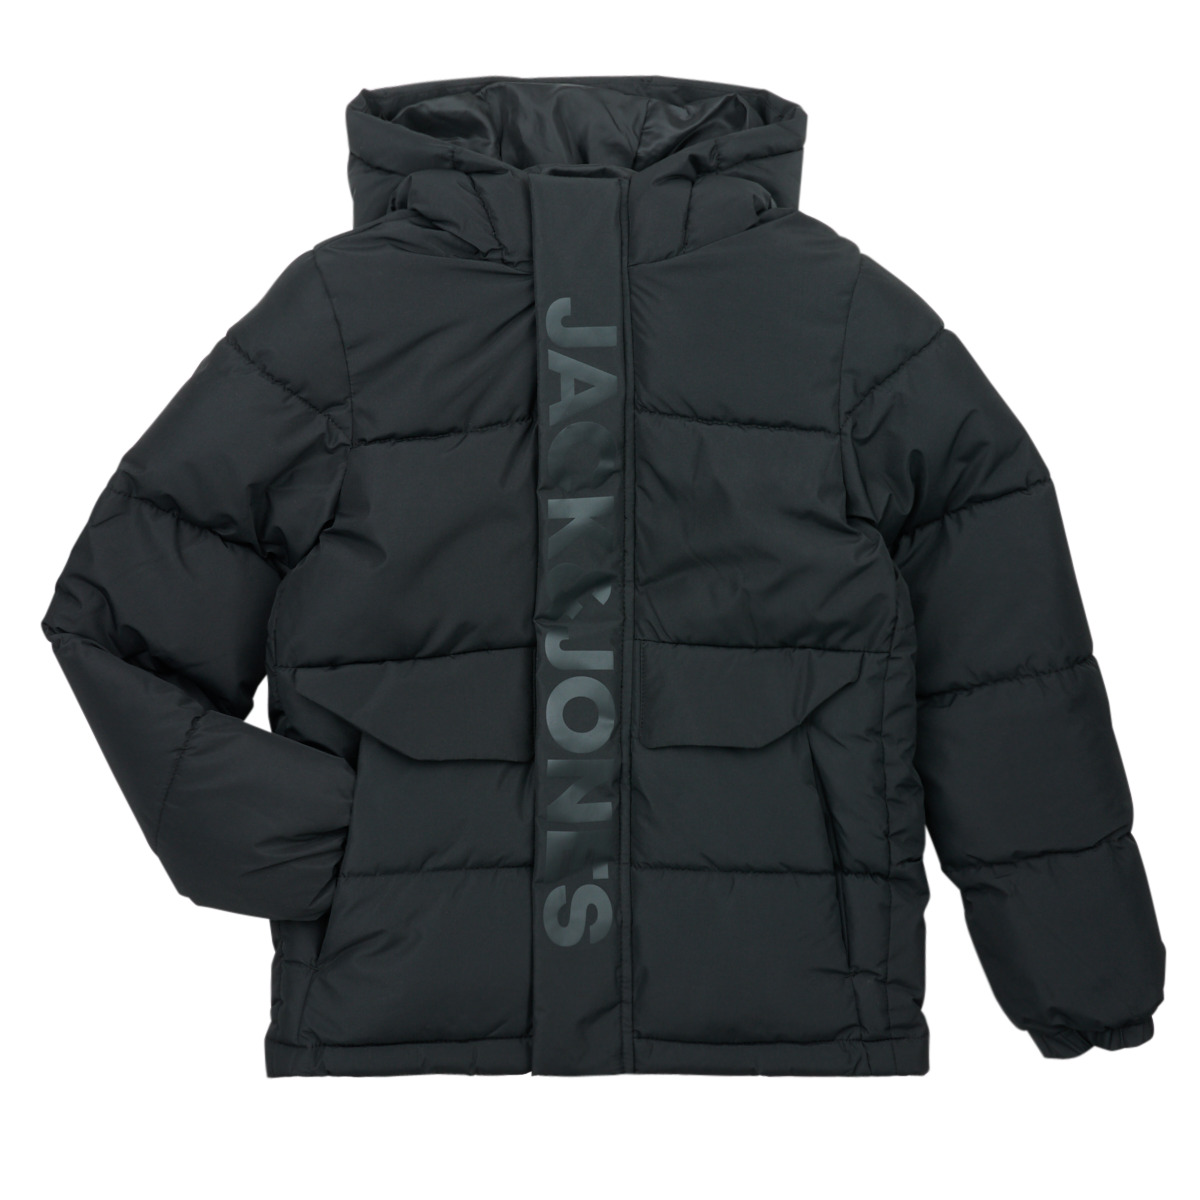 Jack & Jones JCOSPEED PUFFER SN Black - Free Delivery with Rubbersole.co.uk  ! - Clothing Duffel coats Child £